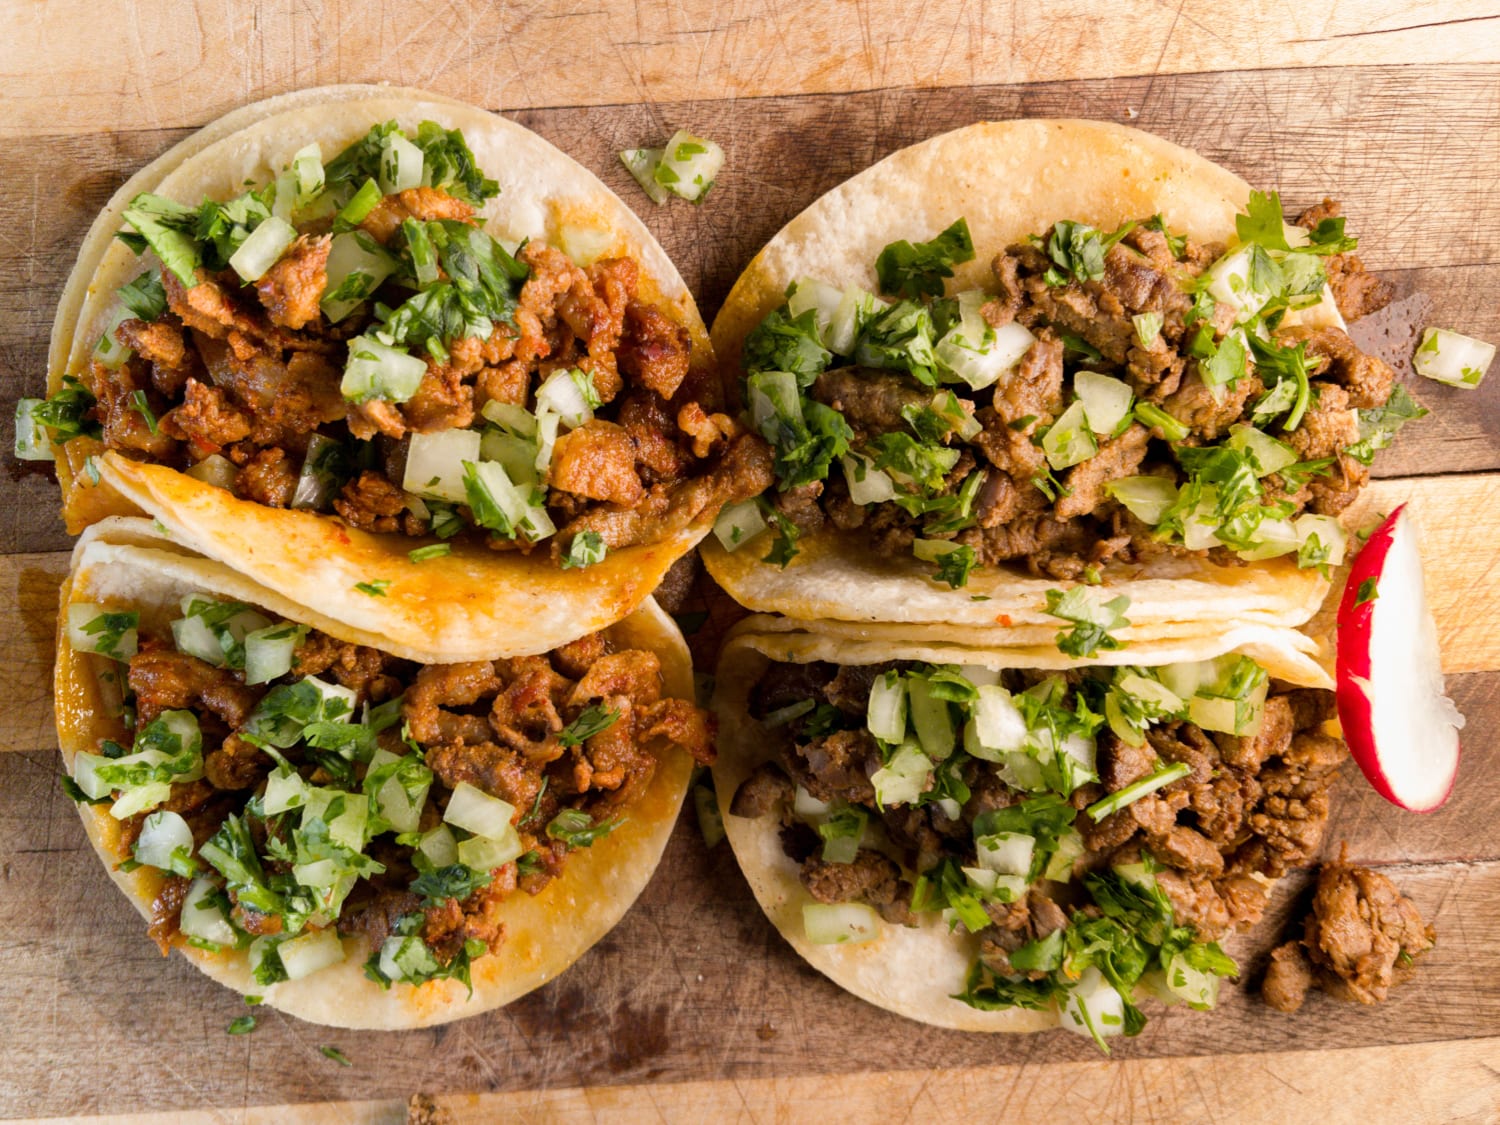 What are the best taco restaurants in the US?